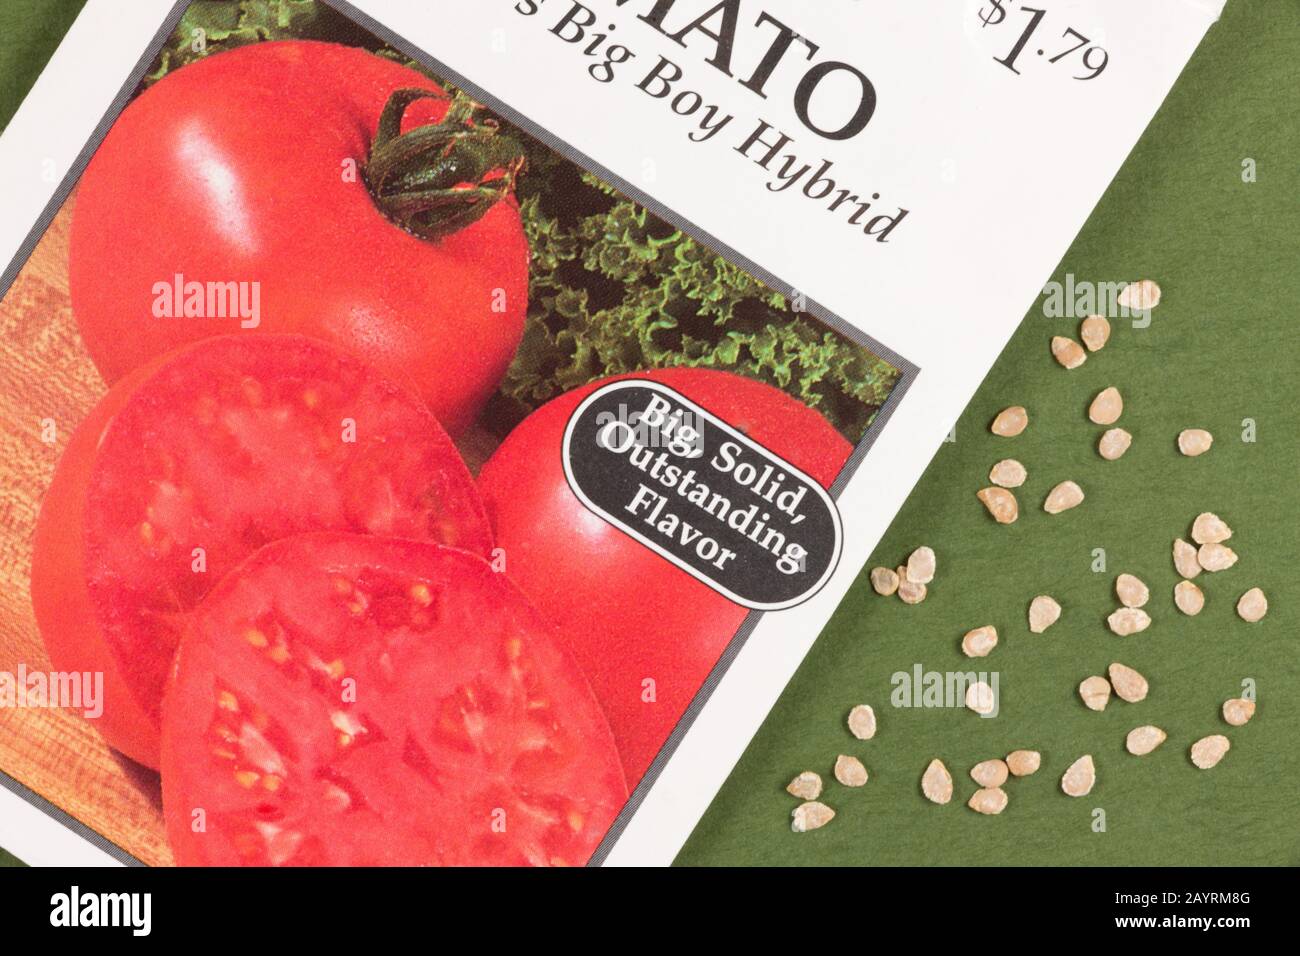 Close-up of Big Boy Hybrid tomato seeds and tomato seed packet in a studio setting Stock Photo